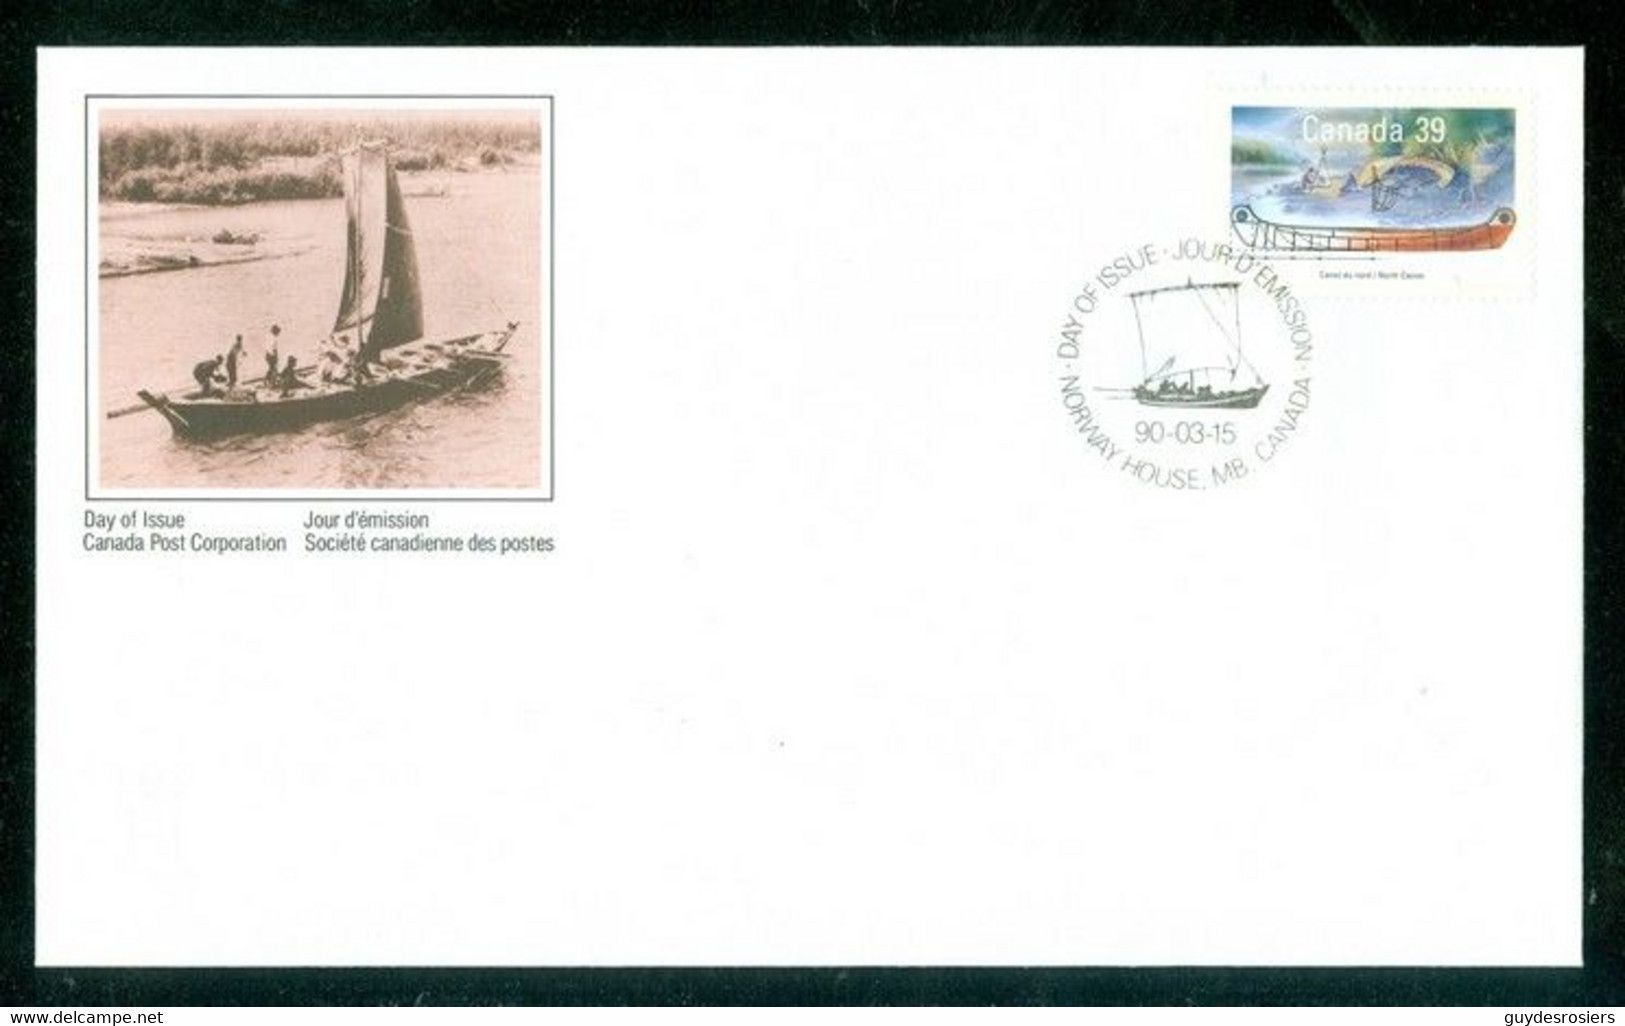 Bateau Canadien / Canadian Boat; Timbre Scott # 1269 Stamp; Pli Premier Jour / First Day Cover (9981) - Covers & Documents